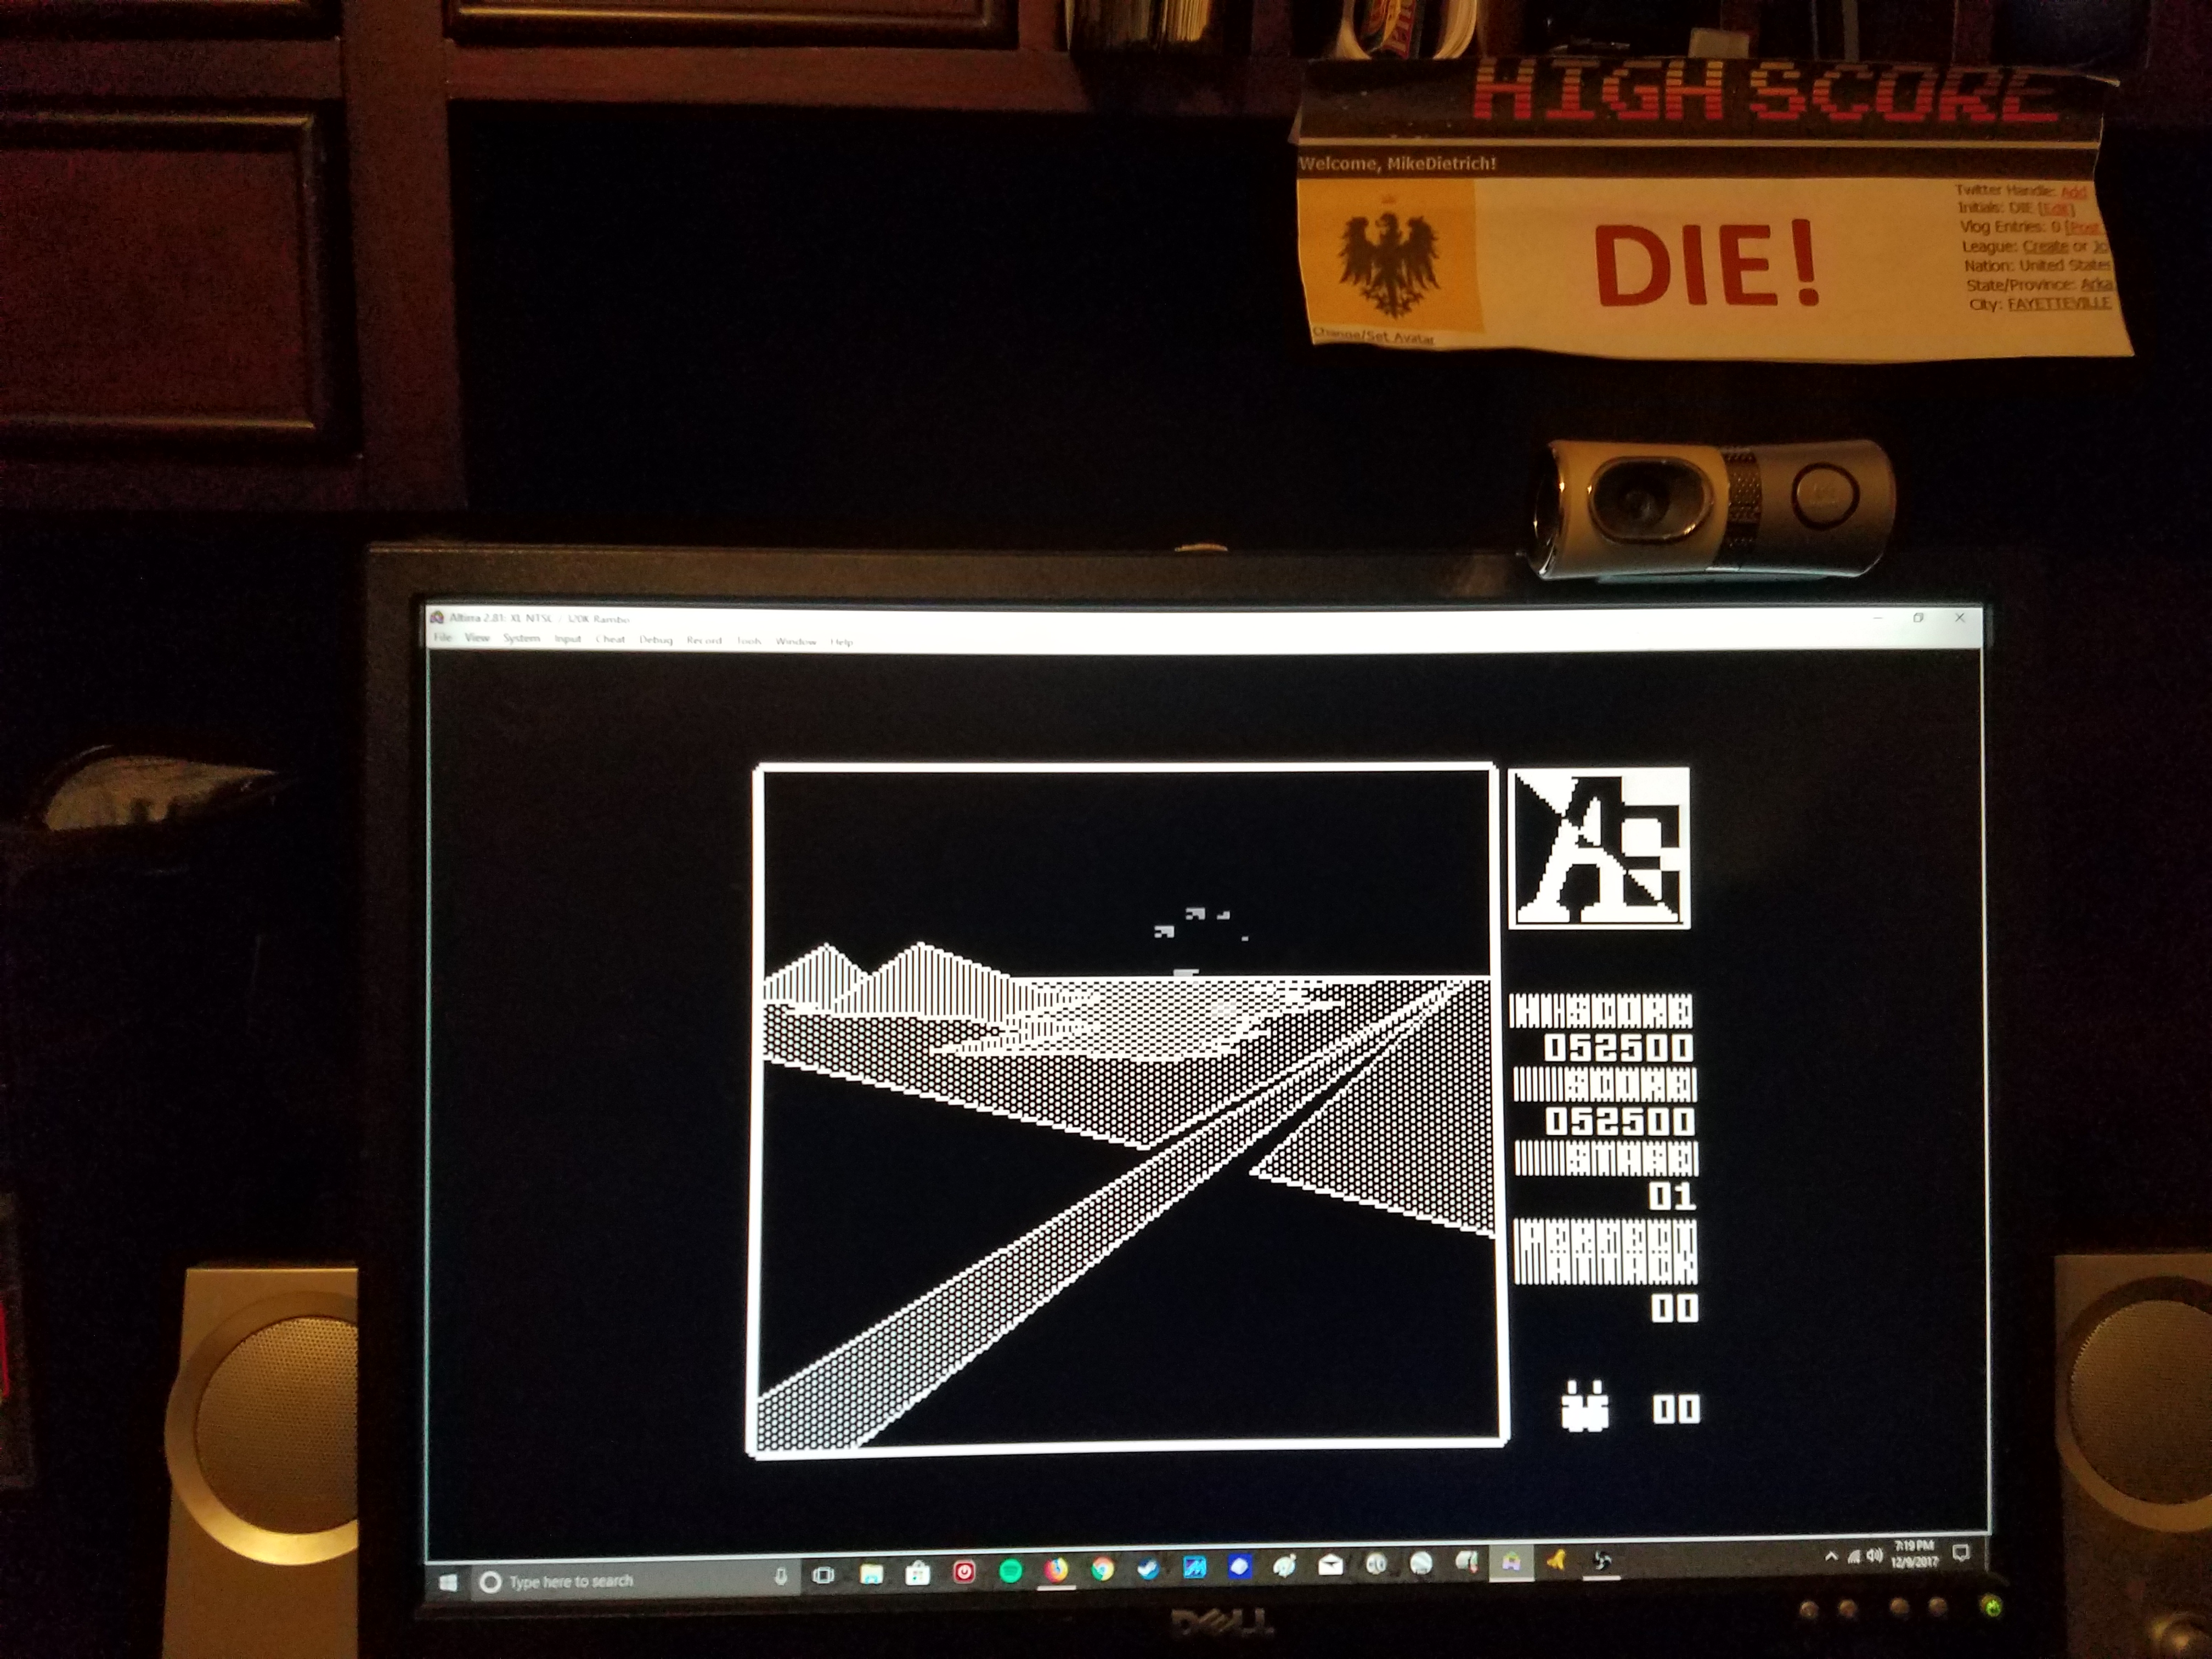 MikeDietrich: A.E. (Atari 400/800/XL/XE Emulated) 52,500 points on 2017-12-09 18:21:32